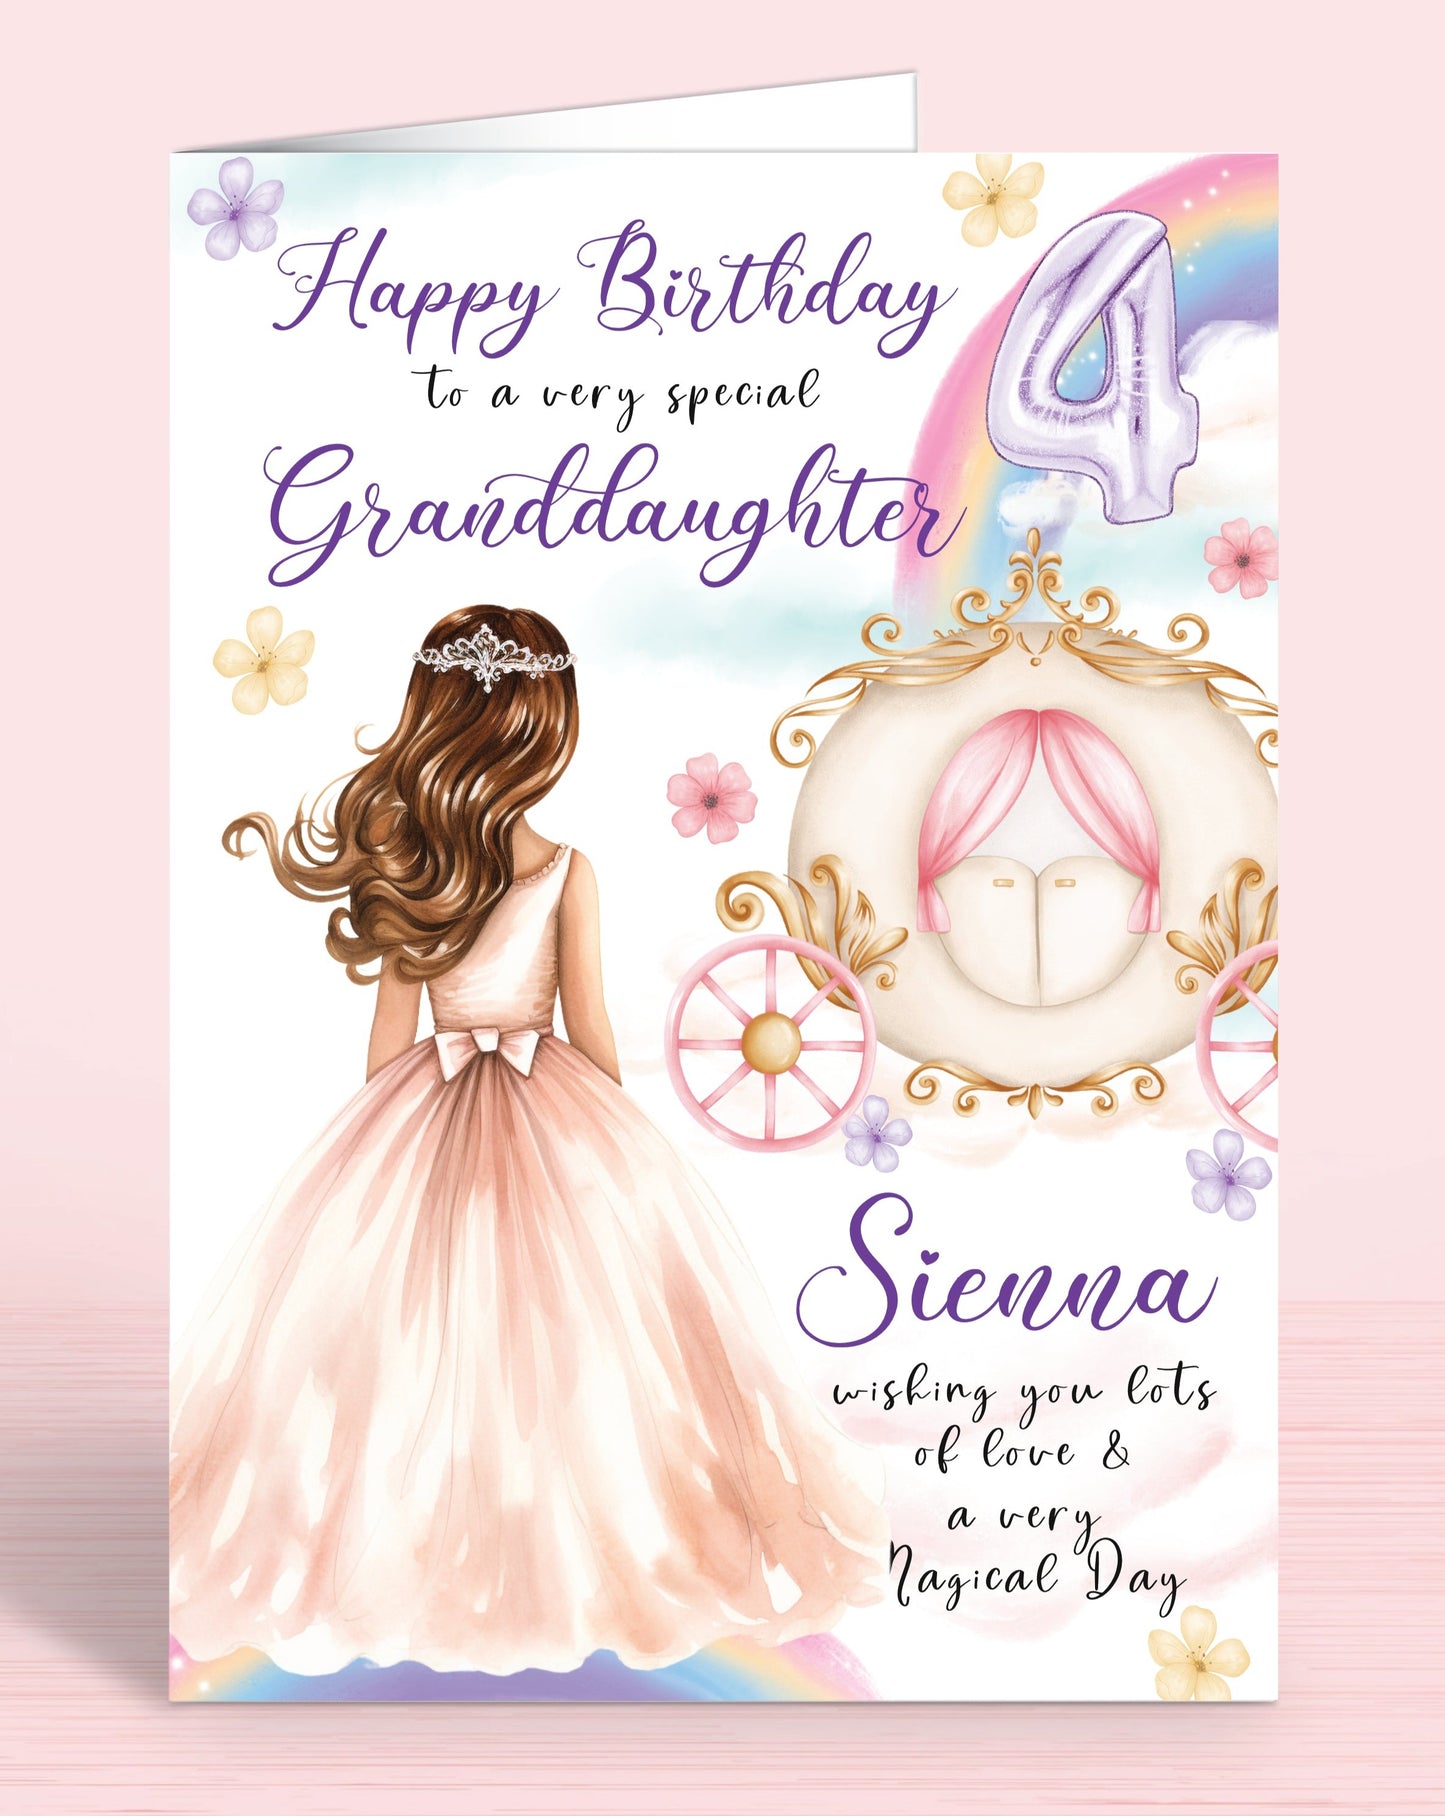 Princess Carriage Personalised Birthday Card, Daughter 4th, 5th Birthday Card, Happy Birthday to a very special Granddaughter, [Name] wishing you lots of love & a very Magical Day [GIRL D] BROWN HAIR | Oliver Rose Designs